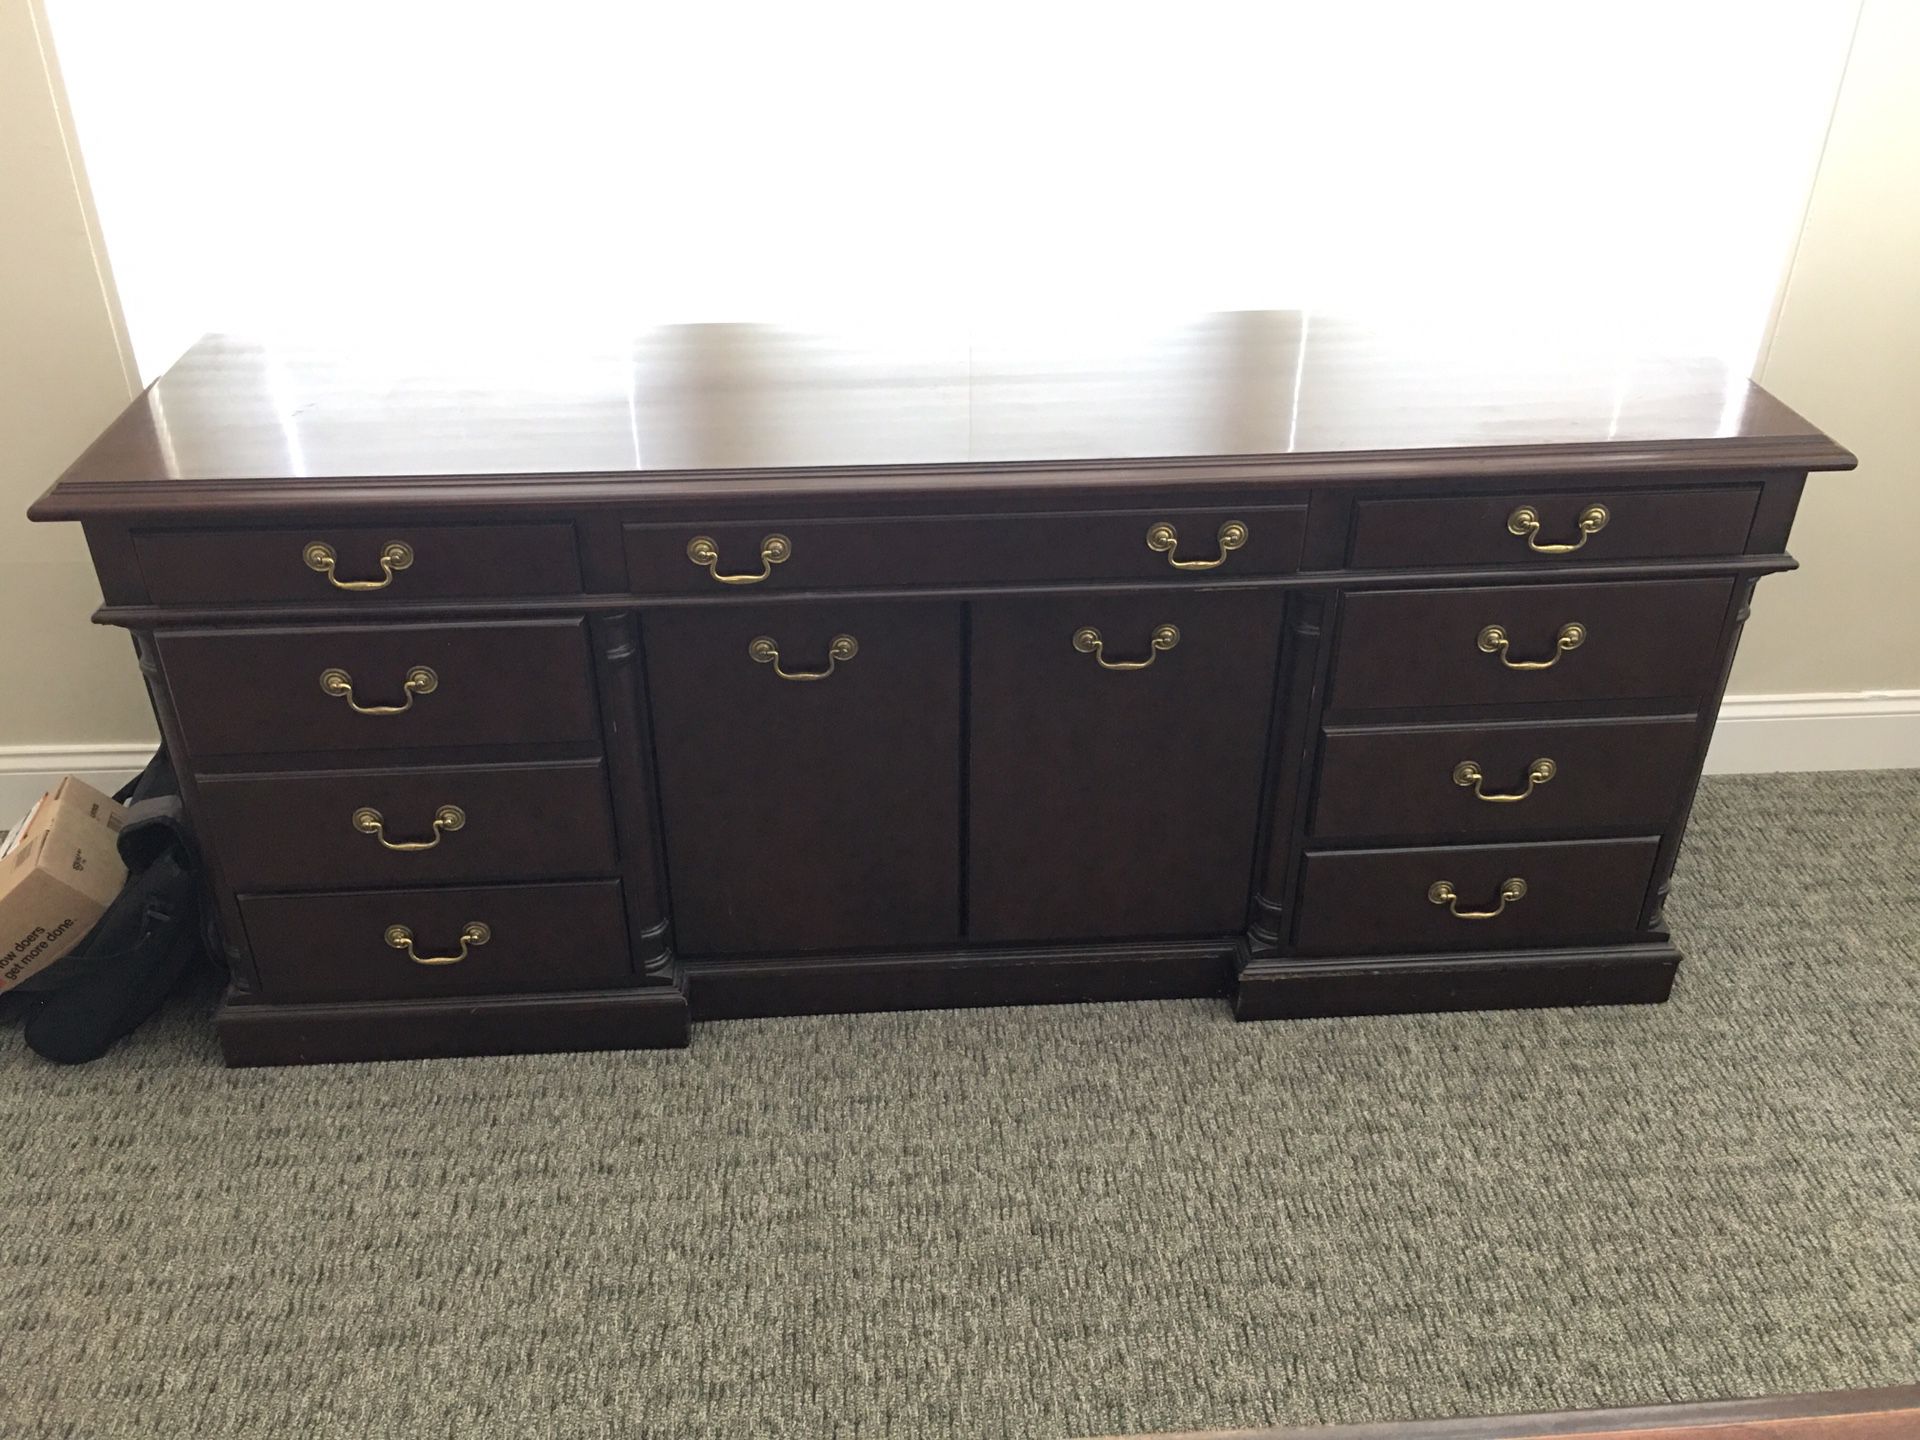 Credenza, solid wood lockable file drawers